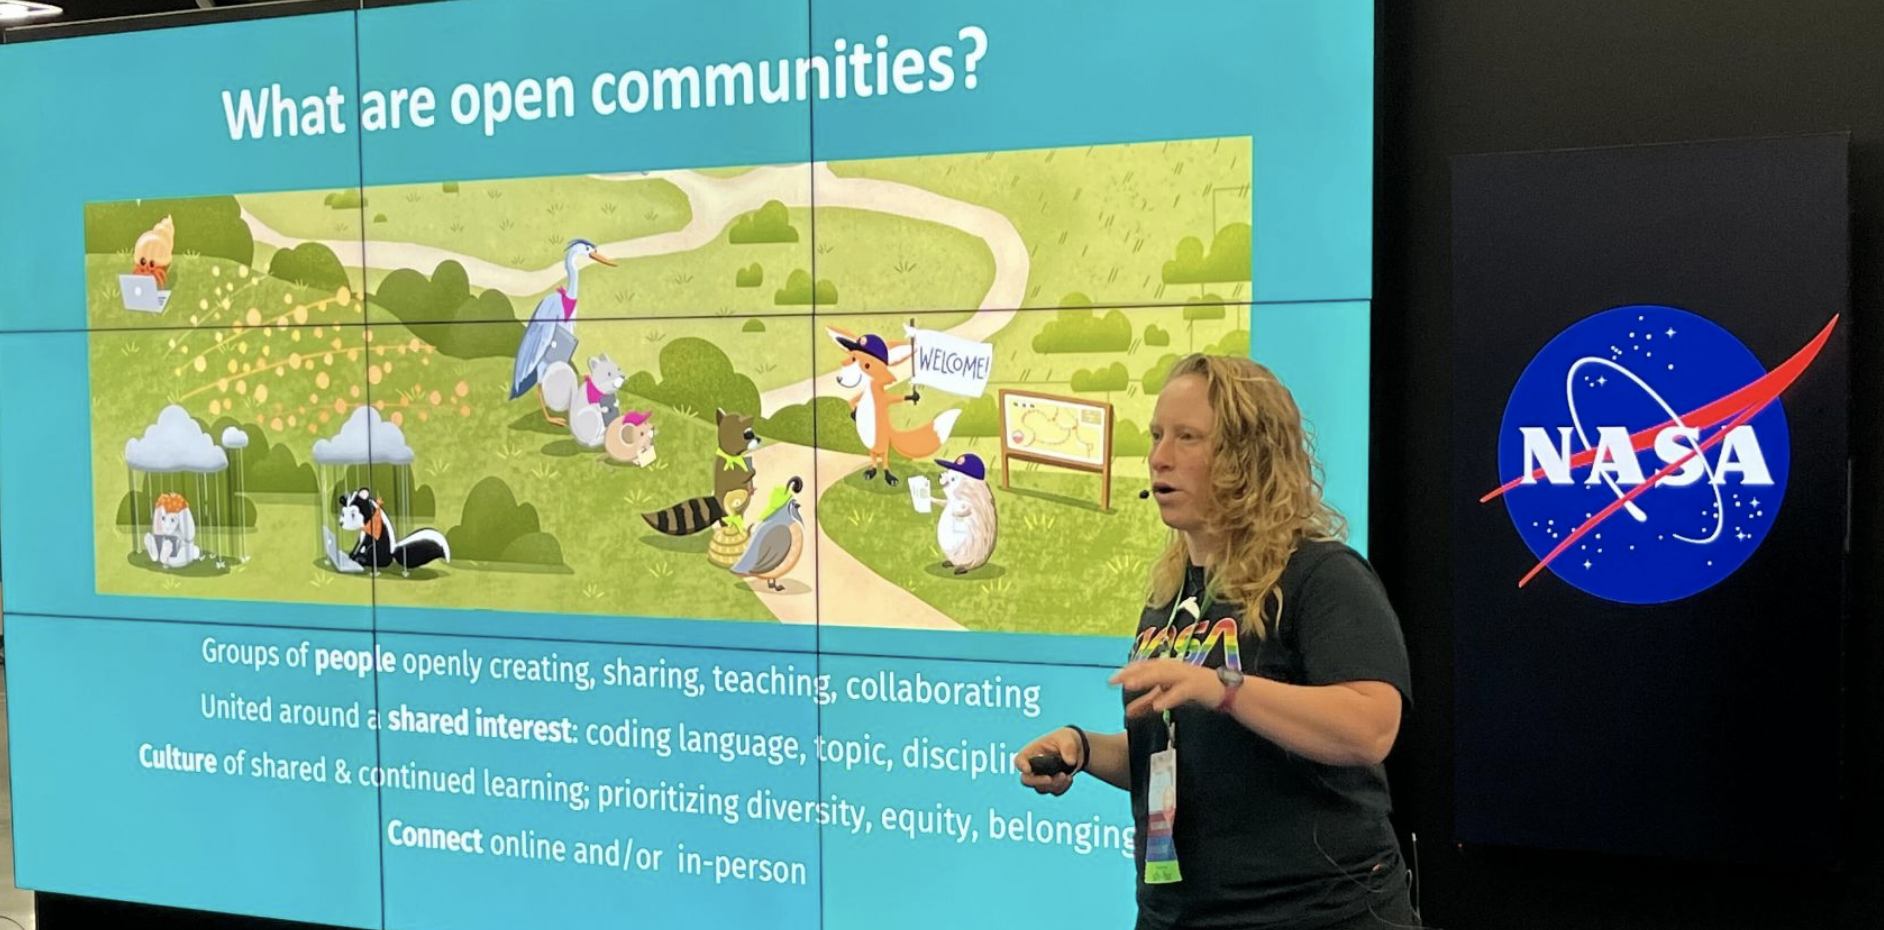 Photo of a white woman presenting, standing in front of a big NASA logo and a screen that says Open Communities with an illustration of friendly animals.